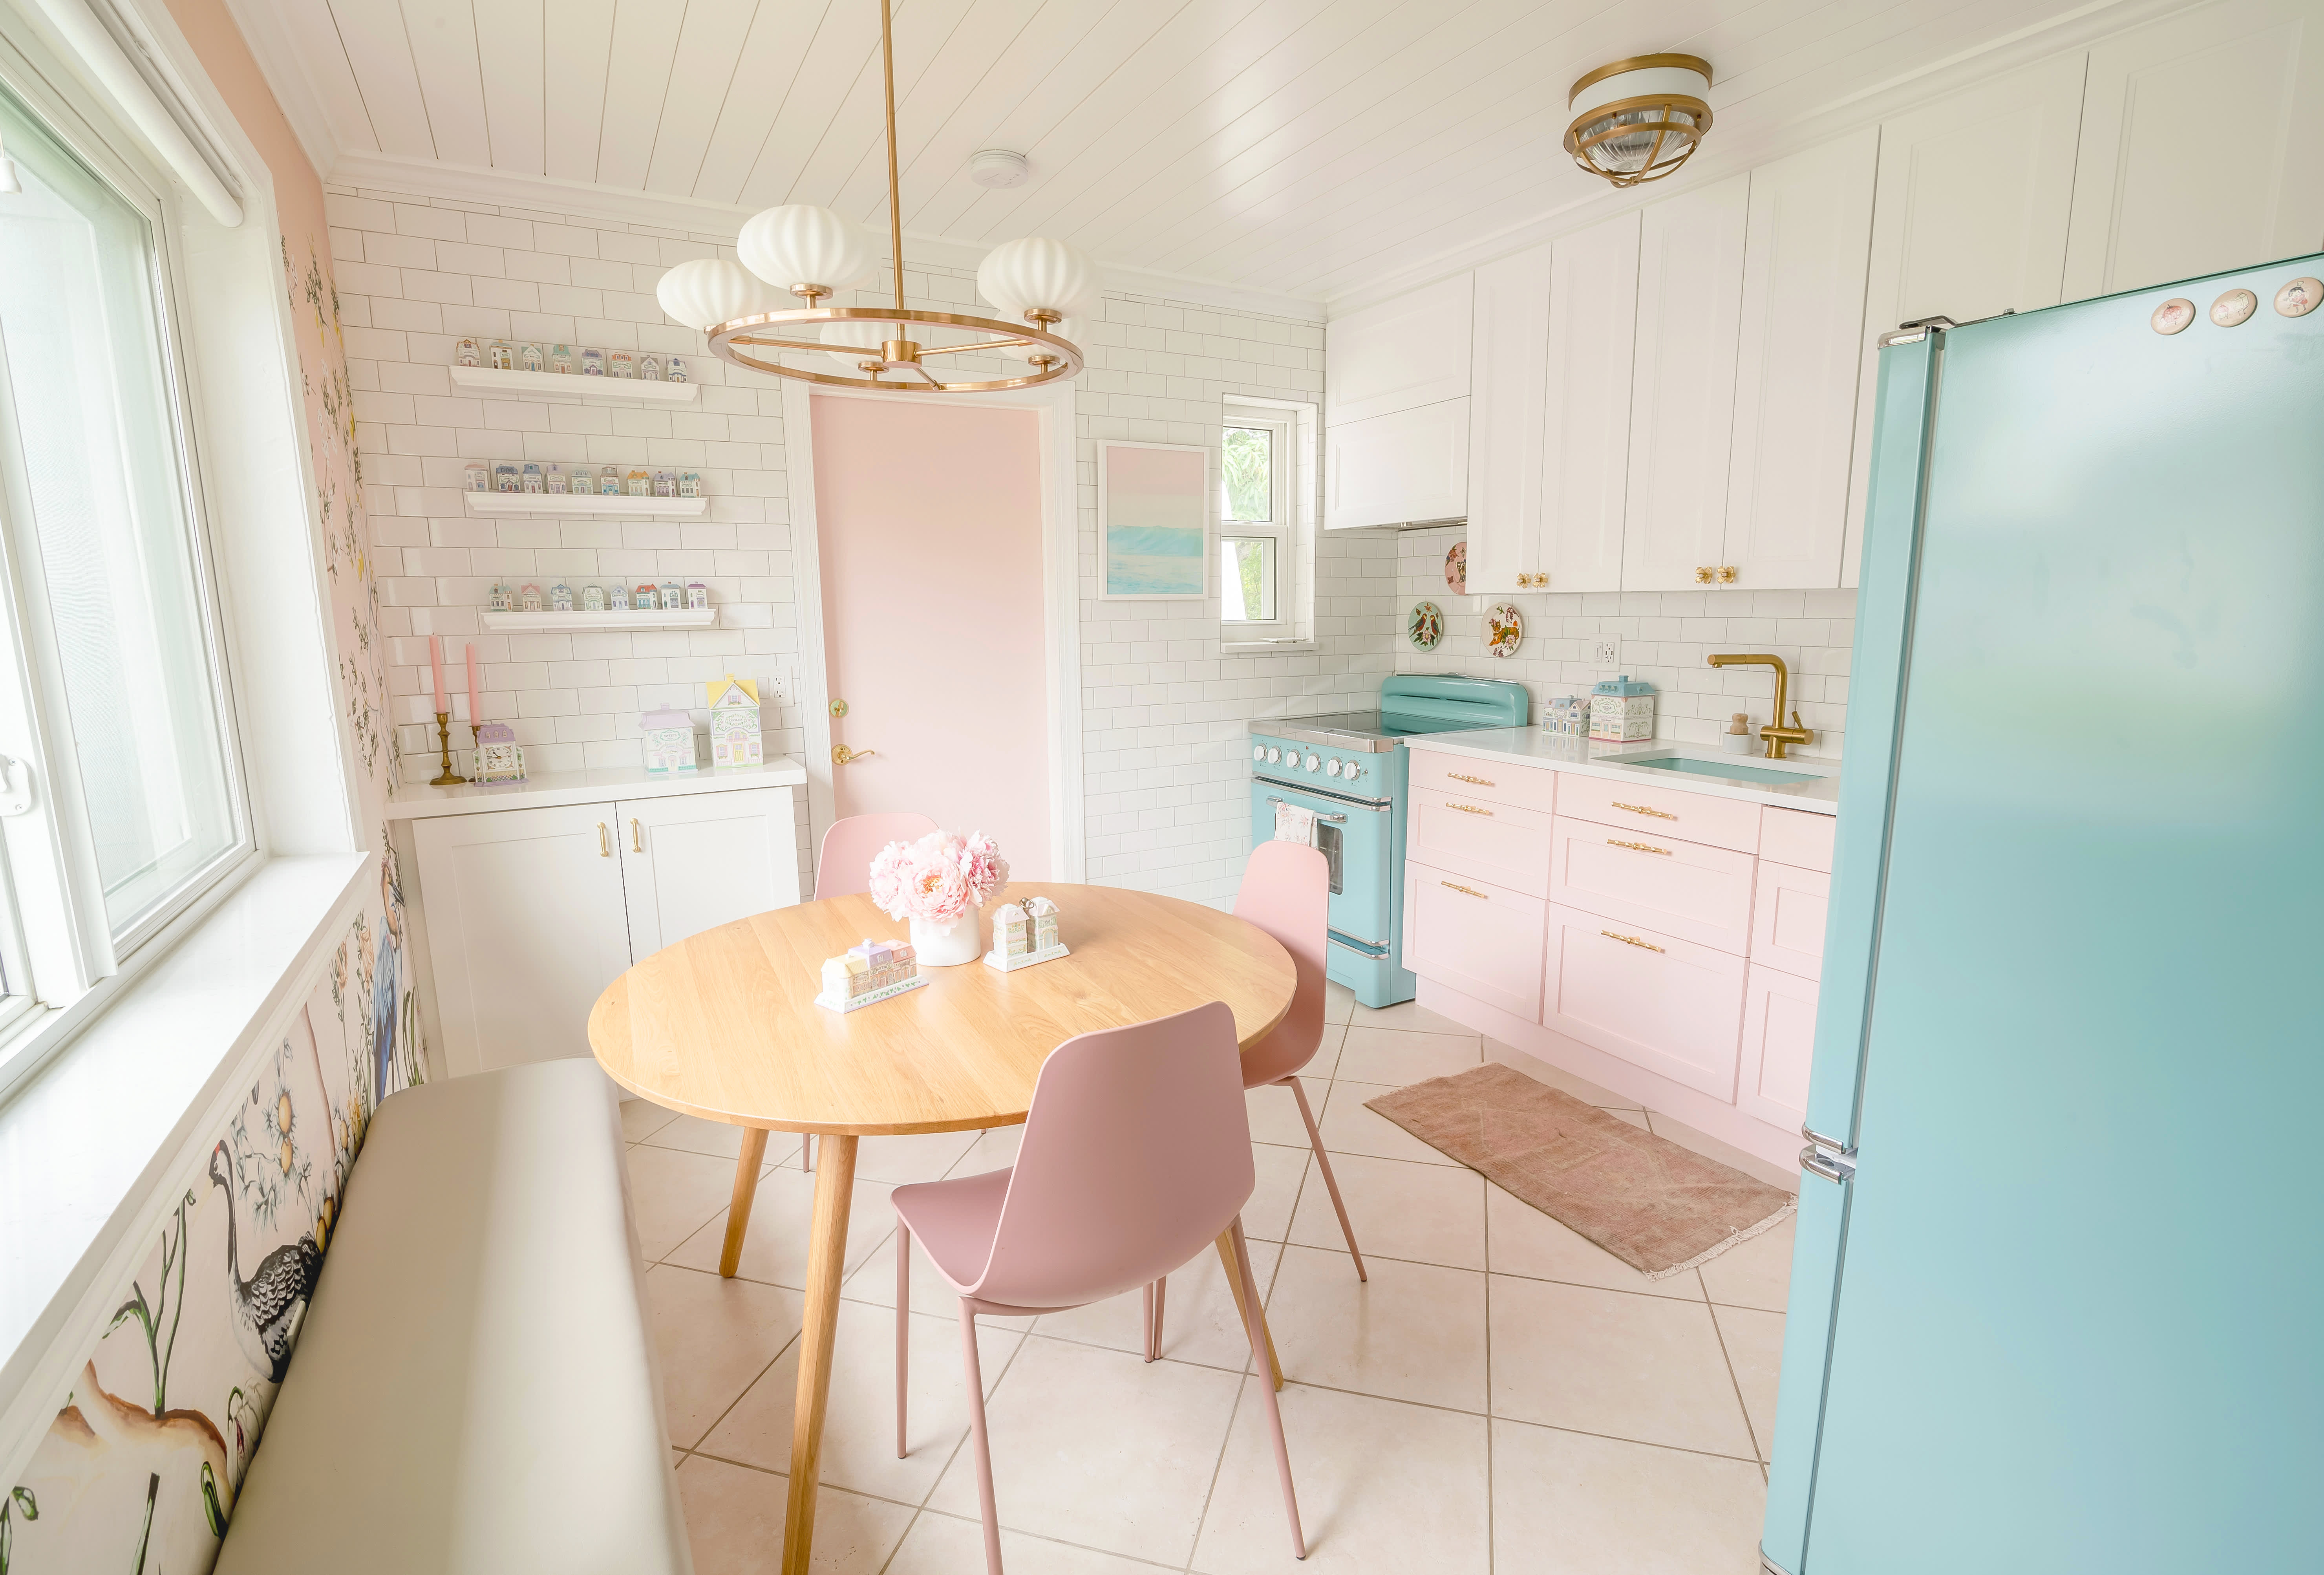 3 Decorating Ideas to Steal From Ashley Wilson's Pastel Kitchen